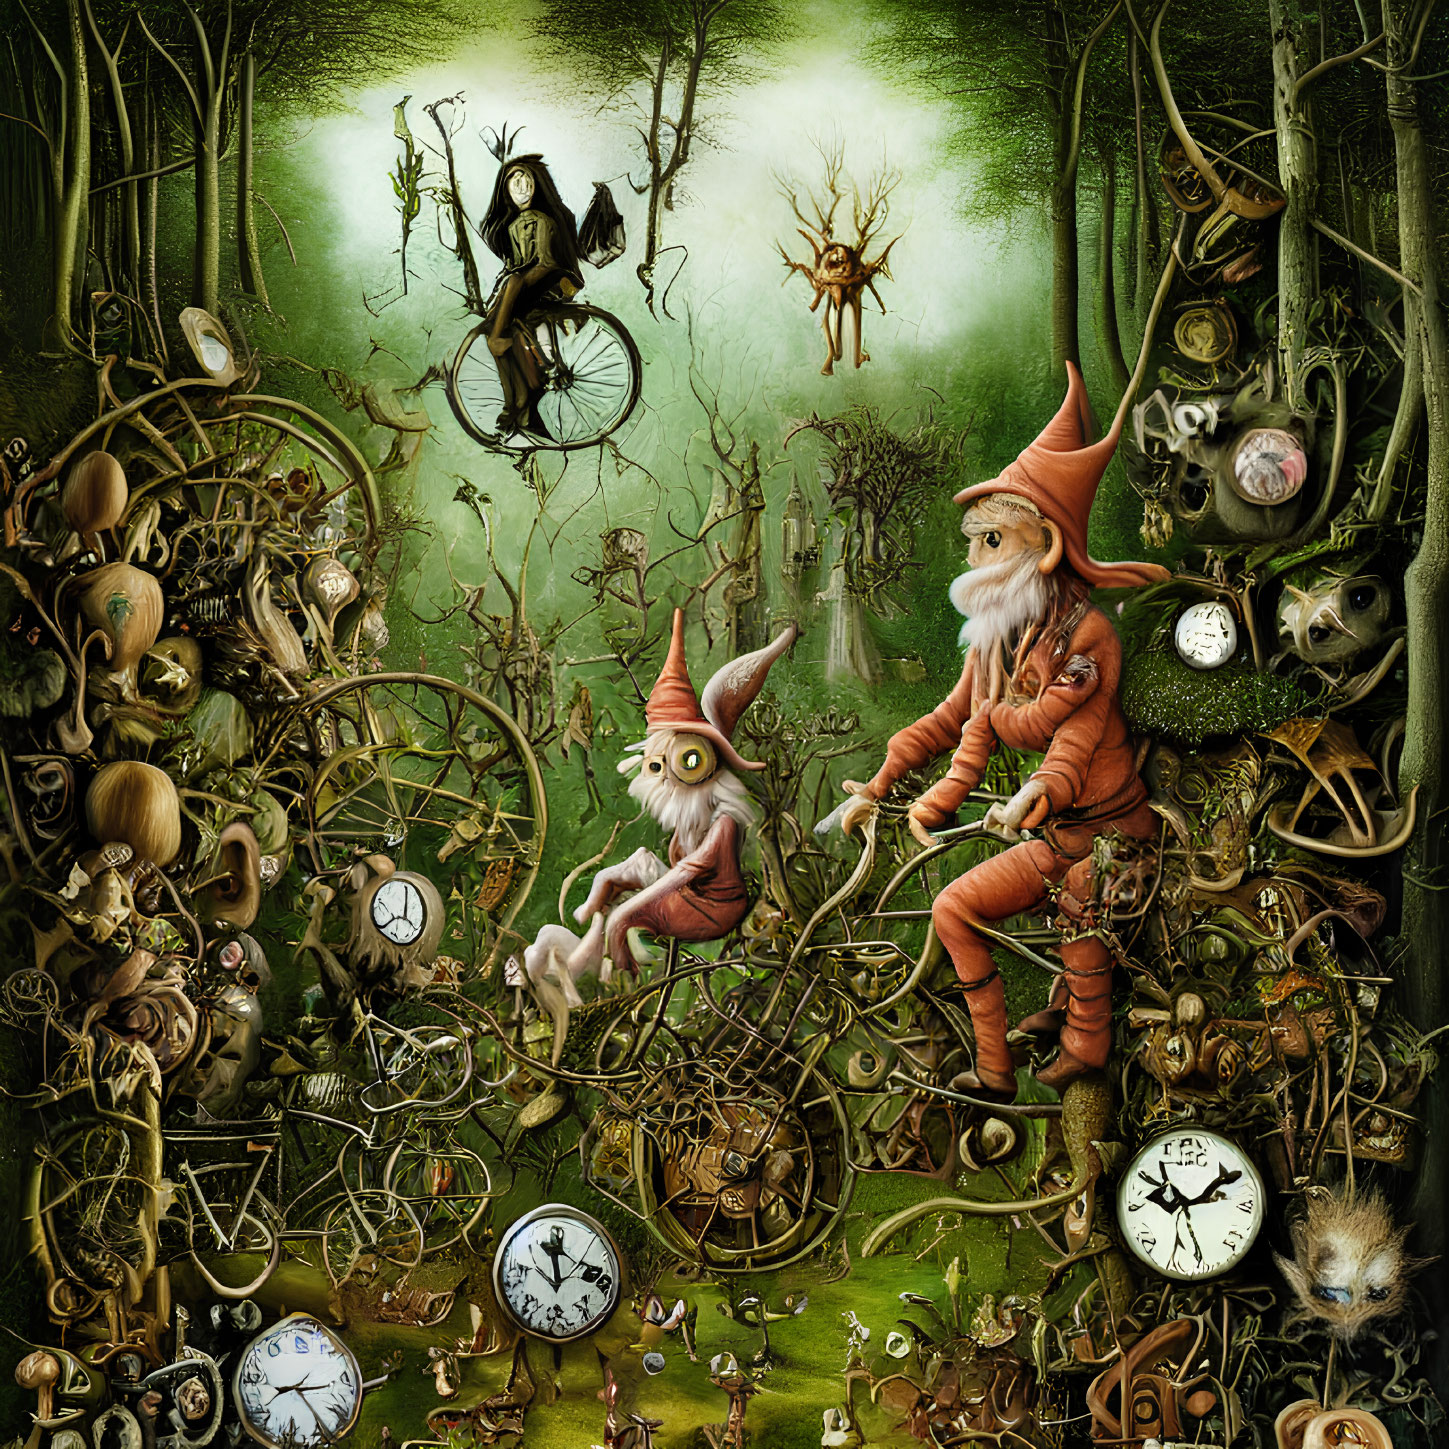 Steampunk forest scene with gnome-like characters and clocks